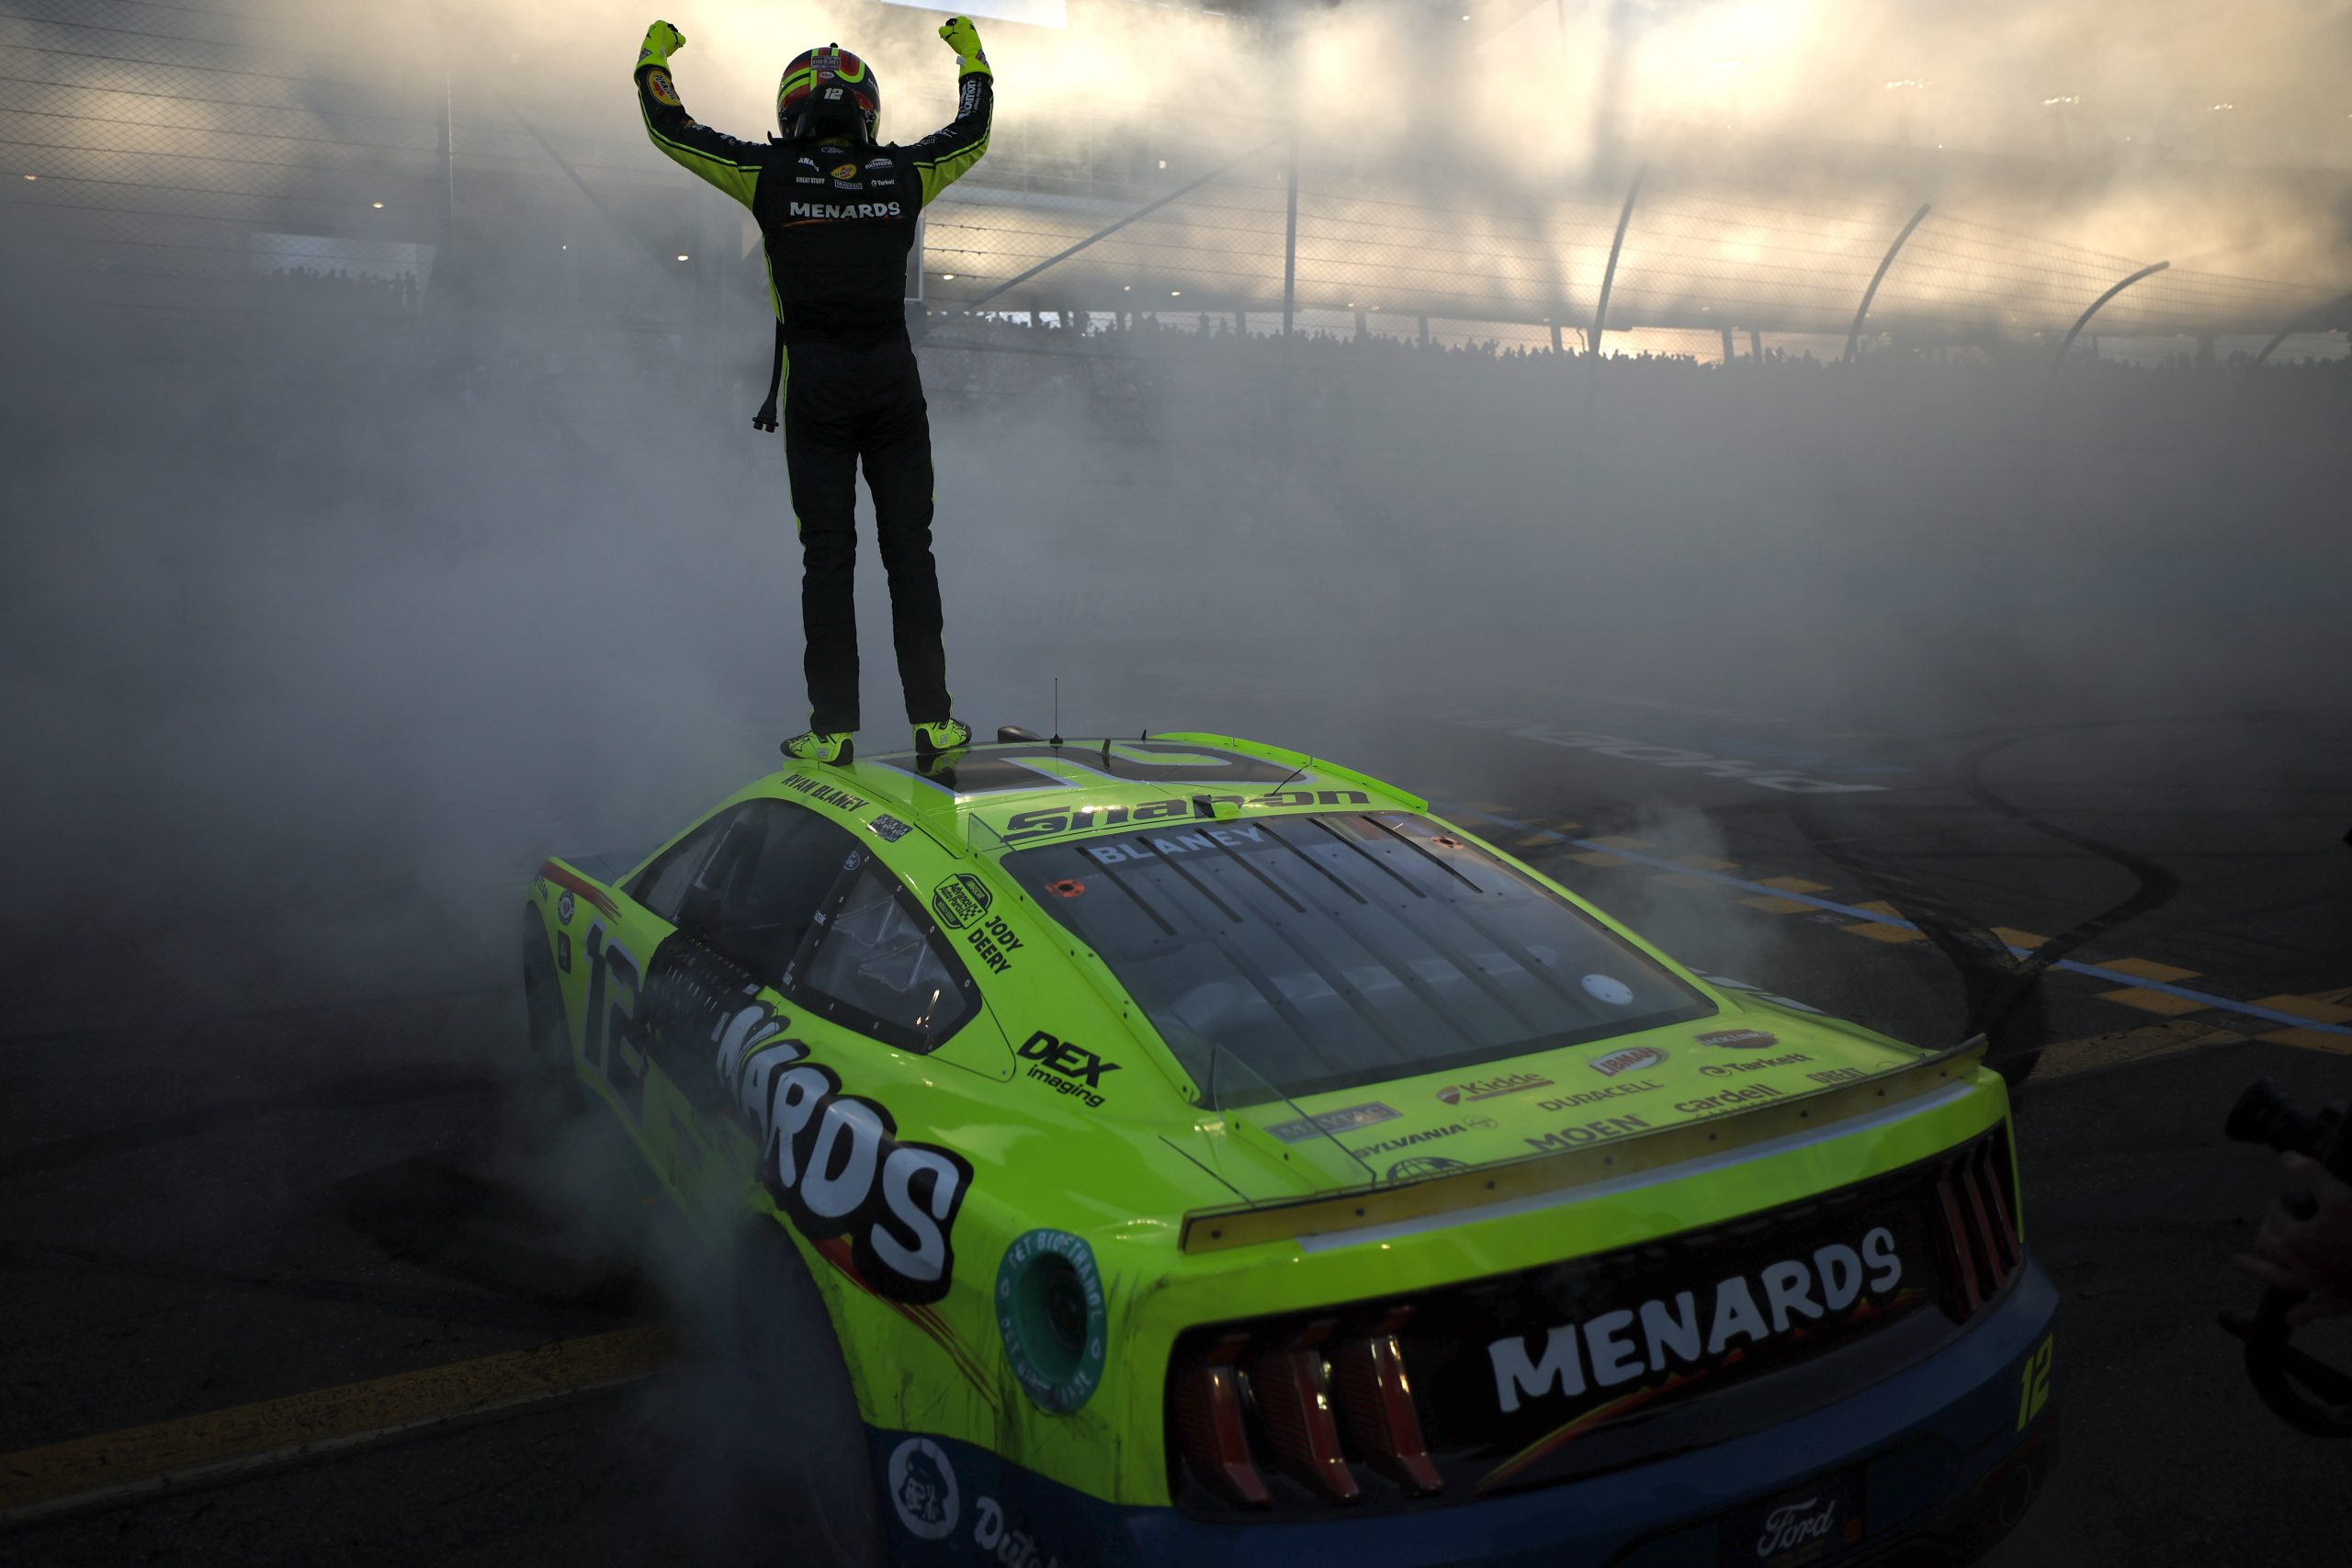 Ryan Blaney, driver of the #12 Menards/Dutch Boy Ford, celebrates after winning the 2023 NASCAR Cup Series Championship, finishing first of the Championship 4 drivers in the NASCAR Cup Series Championship race at Phoenix Raceway on November 05, 2023 in Avondale, Arizona.